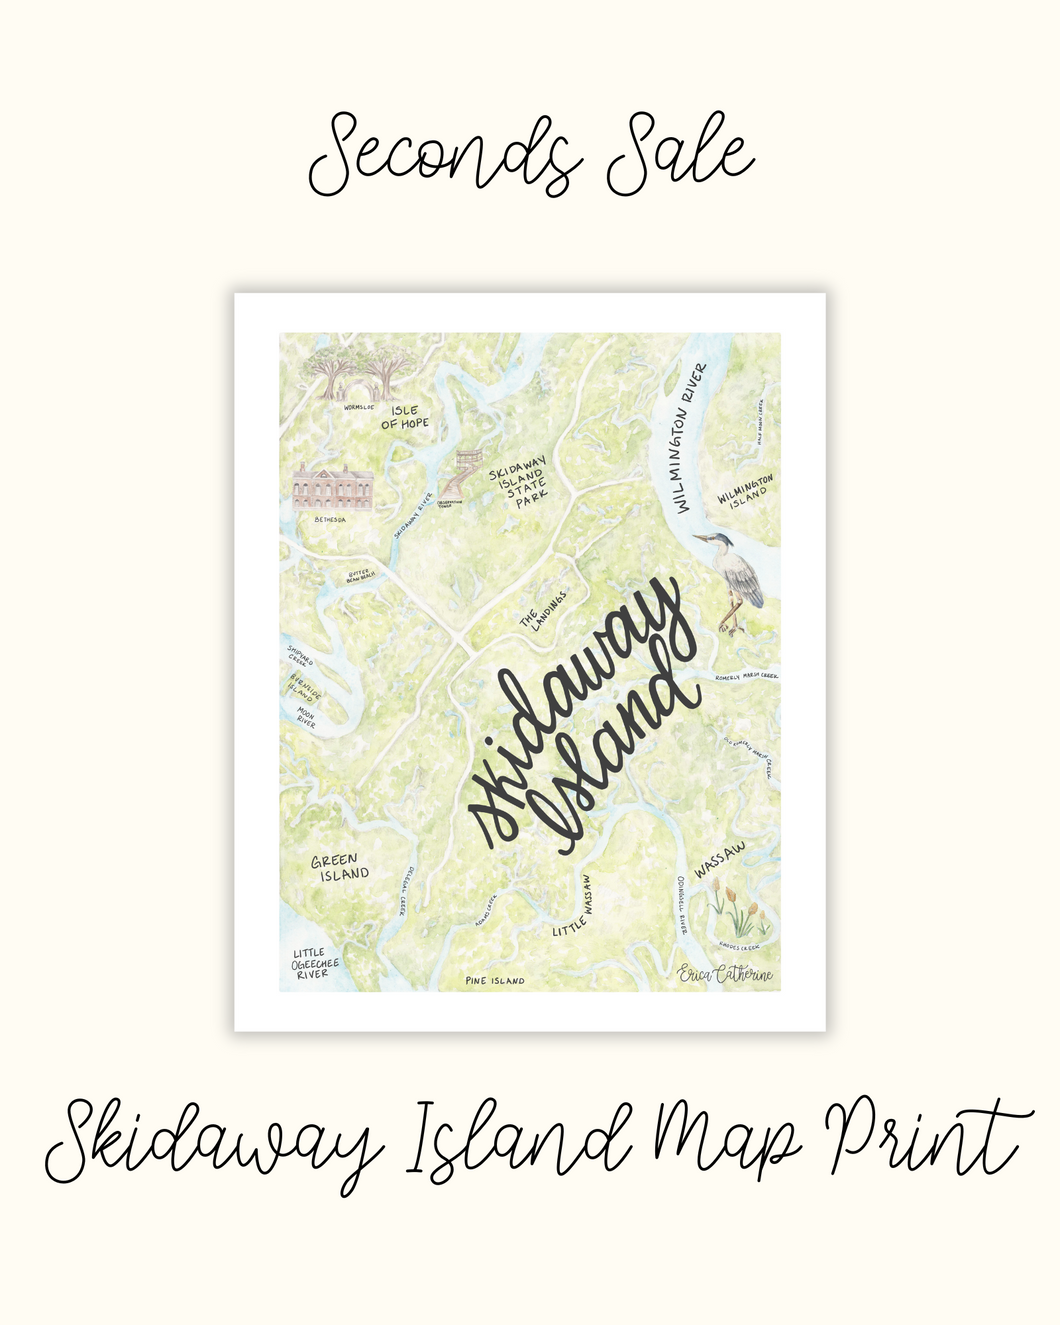 Skidway Island Map - Seconds Sale